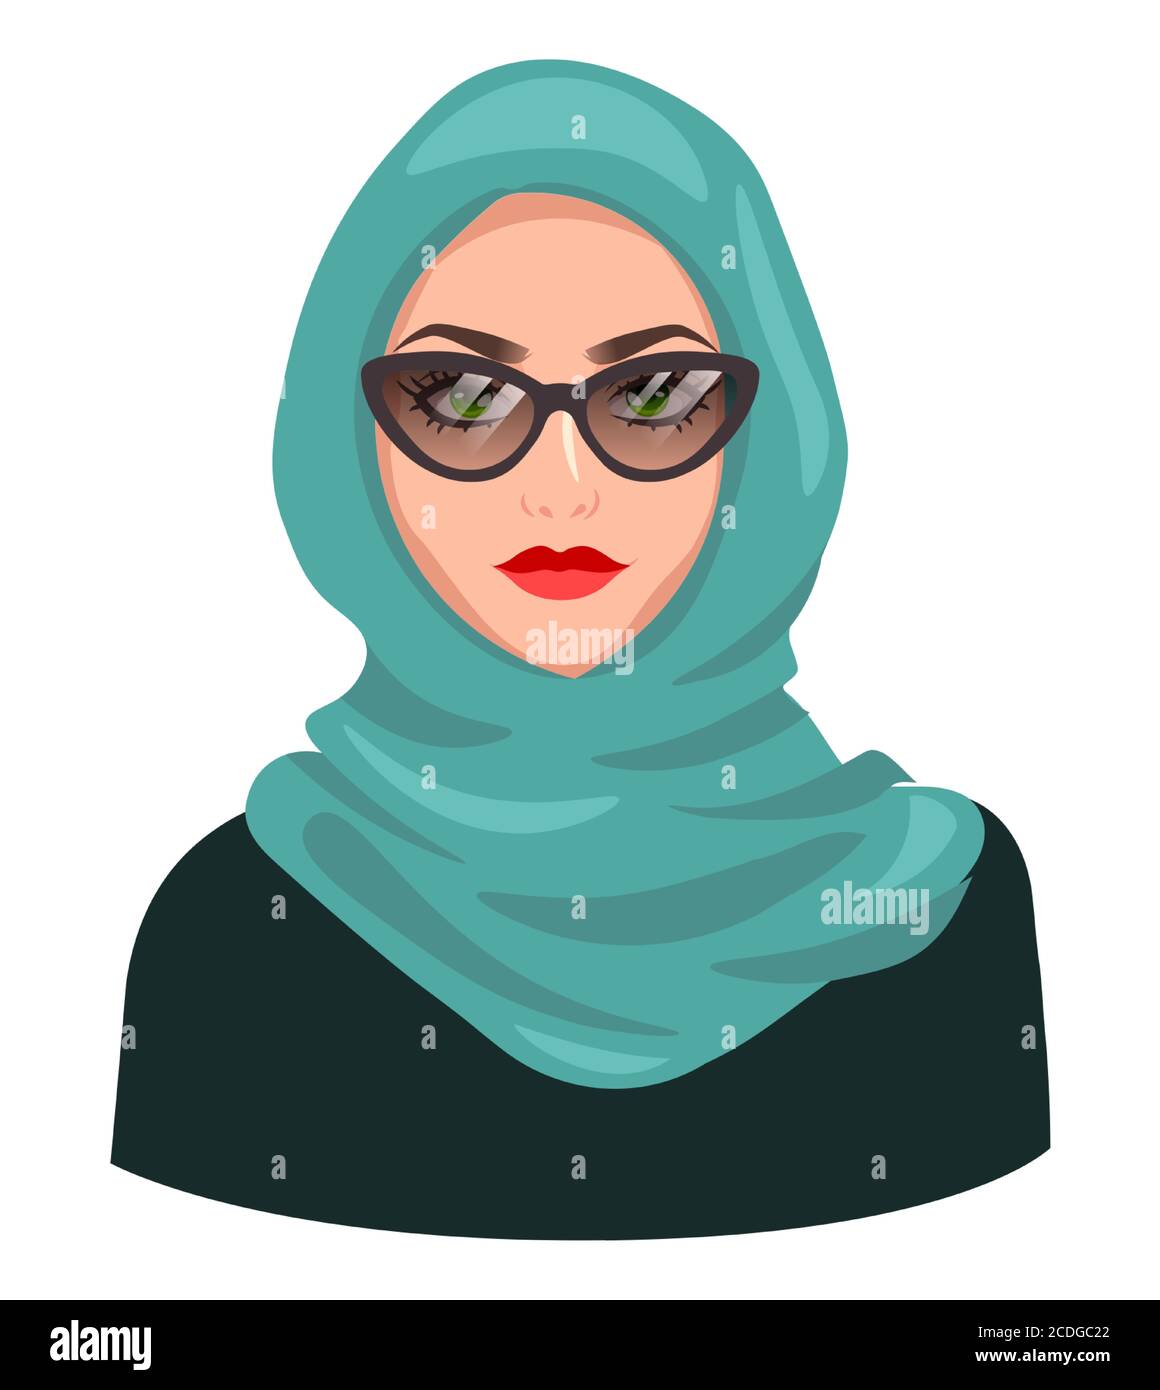 Muslim woman avatar, isolated on white. Young Arabic girl wearing hijab and sunglasses. Cartoon female portrait, flat vector illustration Stock Vector